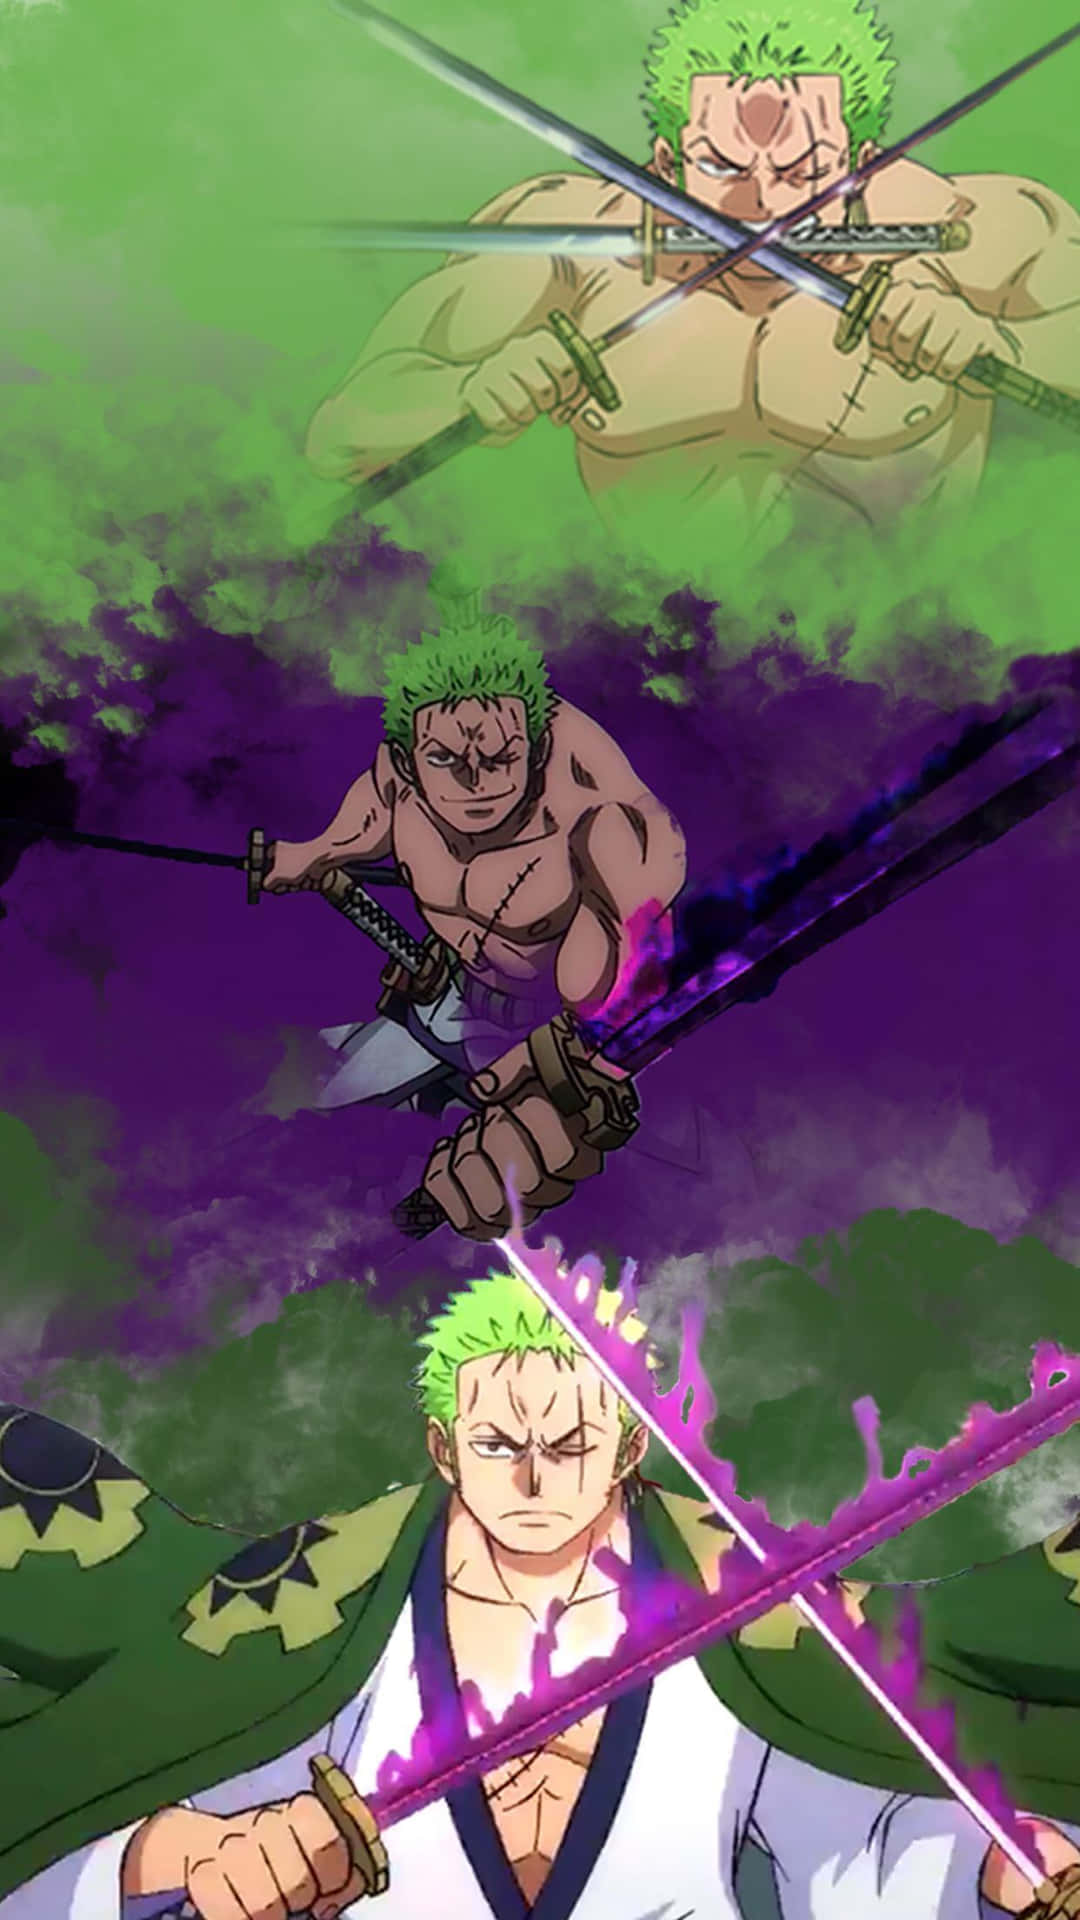 Roronoa Zoro Drawing in Action with Sword